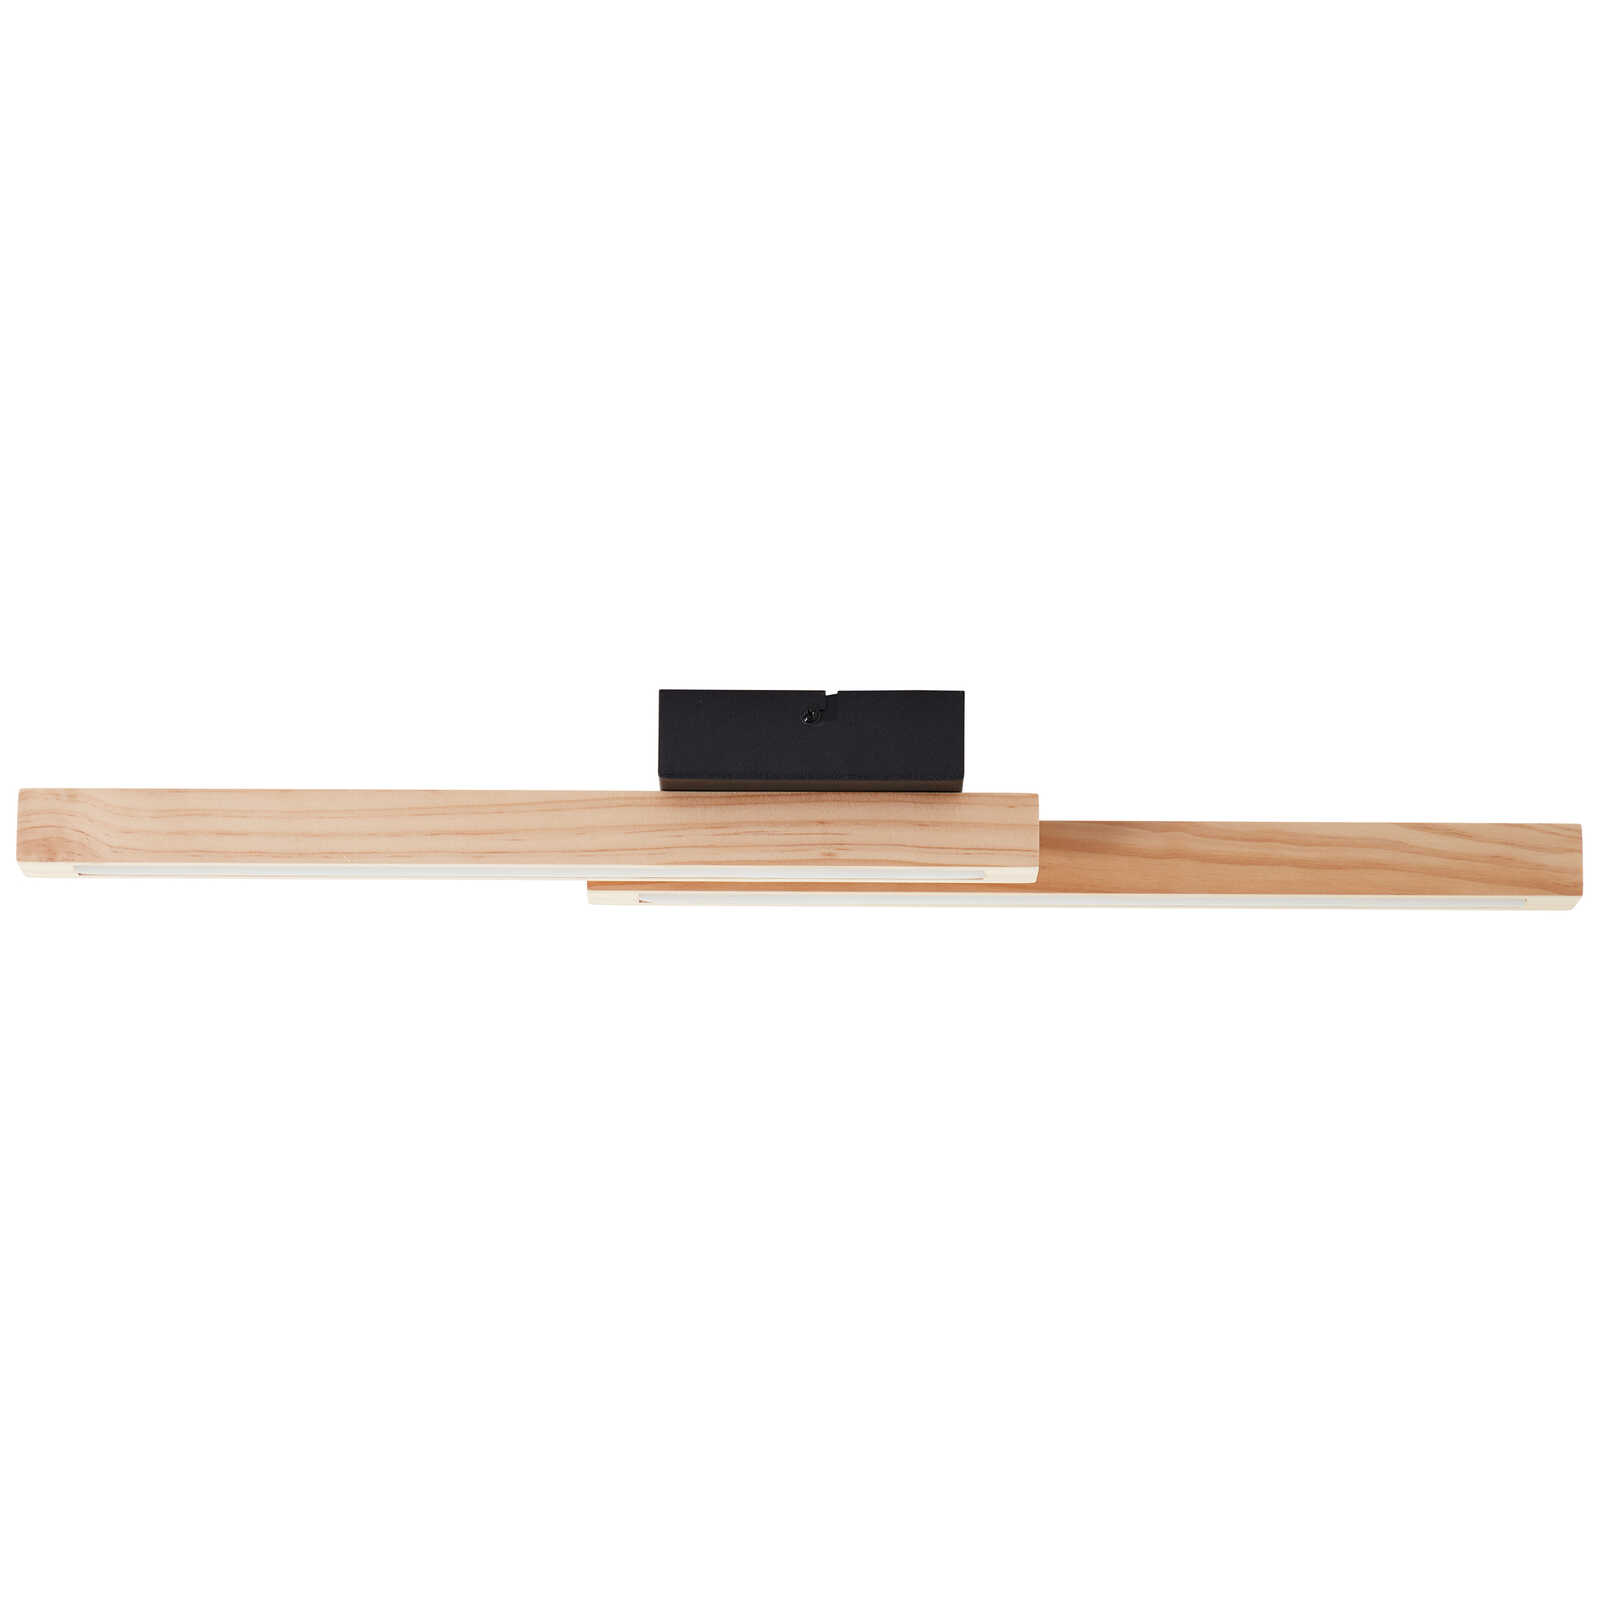             Wooden ceiling light - Anabelle 1 - Brown
        